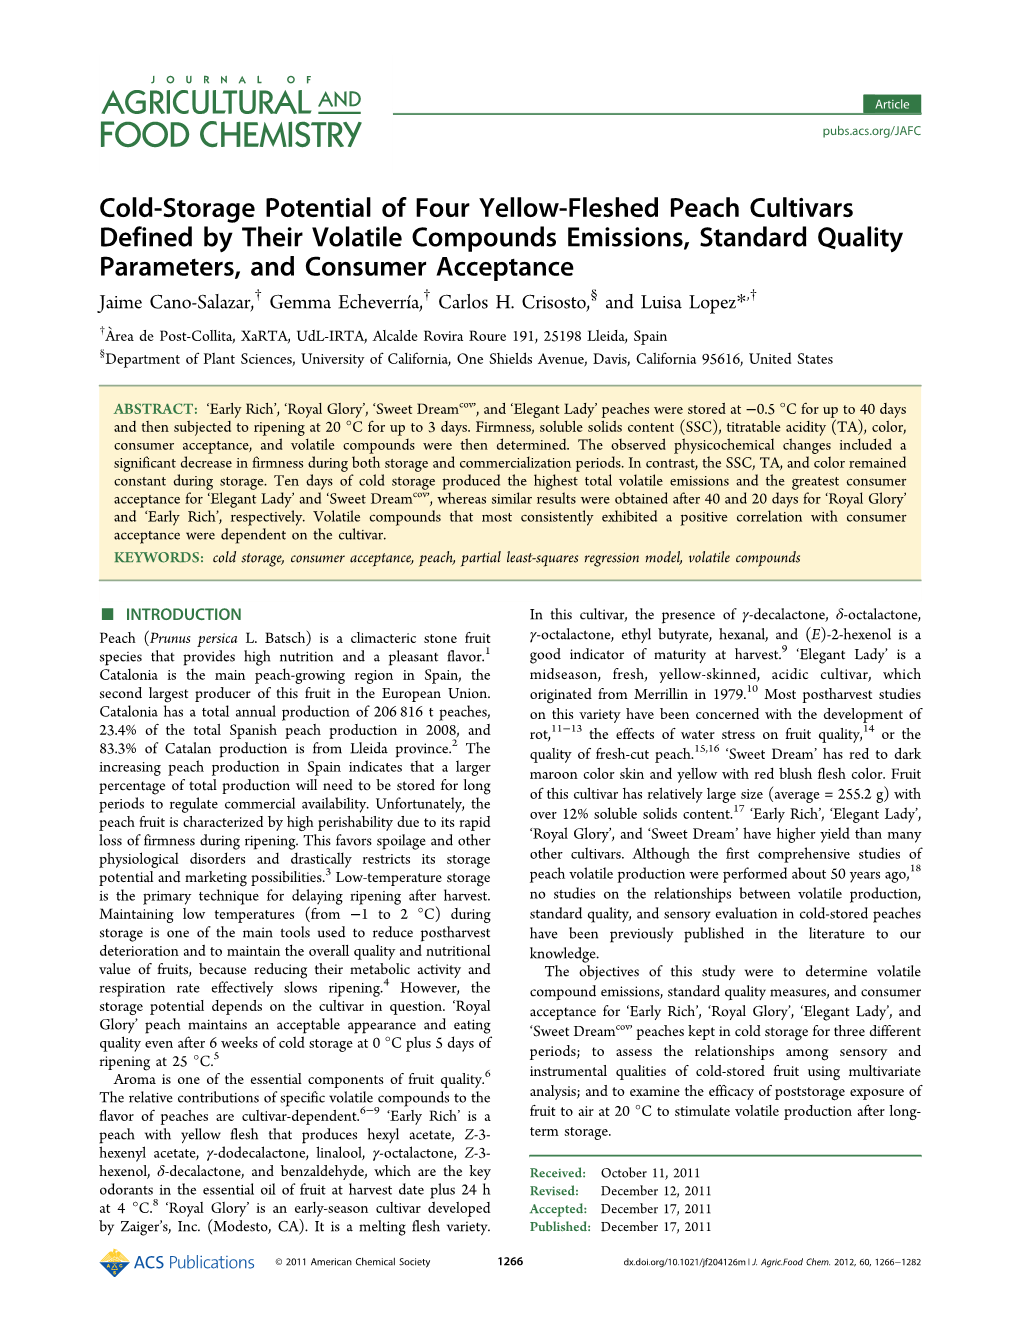 Cold-Storage Potential of Four Yellow-Fleshed Peach Cultivars